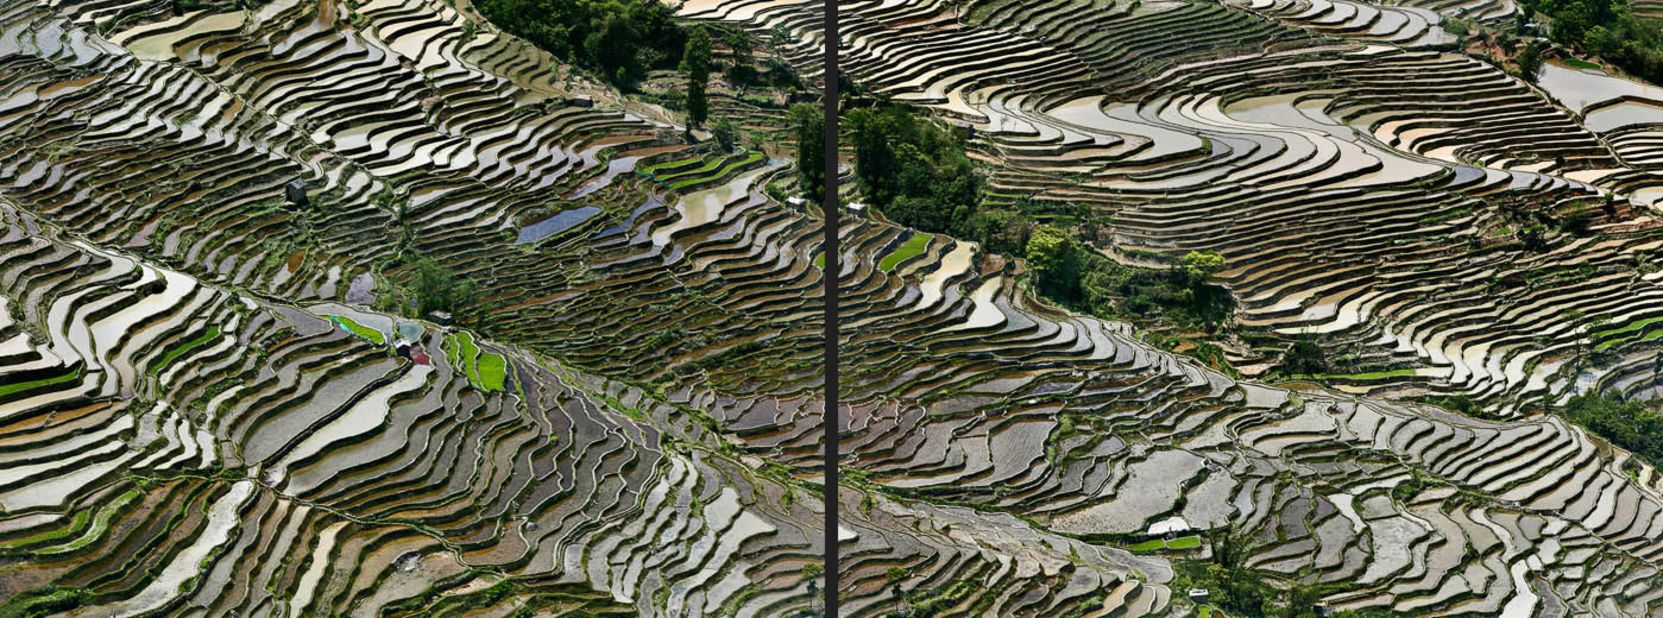 The <a href="http://whc.unesco.org/en/list/1111" target="_blank" target="_blank">Rice Terraces</a> of China's Yunnan Province is a complex agricultural method that has been in practice for over 1,000 years. This system, used by the Hani minority of Yunnan, transfers water from mountaintops to rice terraces. The landscape is listed as a World Heritage Site by <a href="http://whc.unesco.org/en/list/1111" target="_blank" target="_blank">UNESCO</a>. 